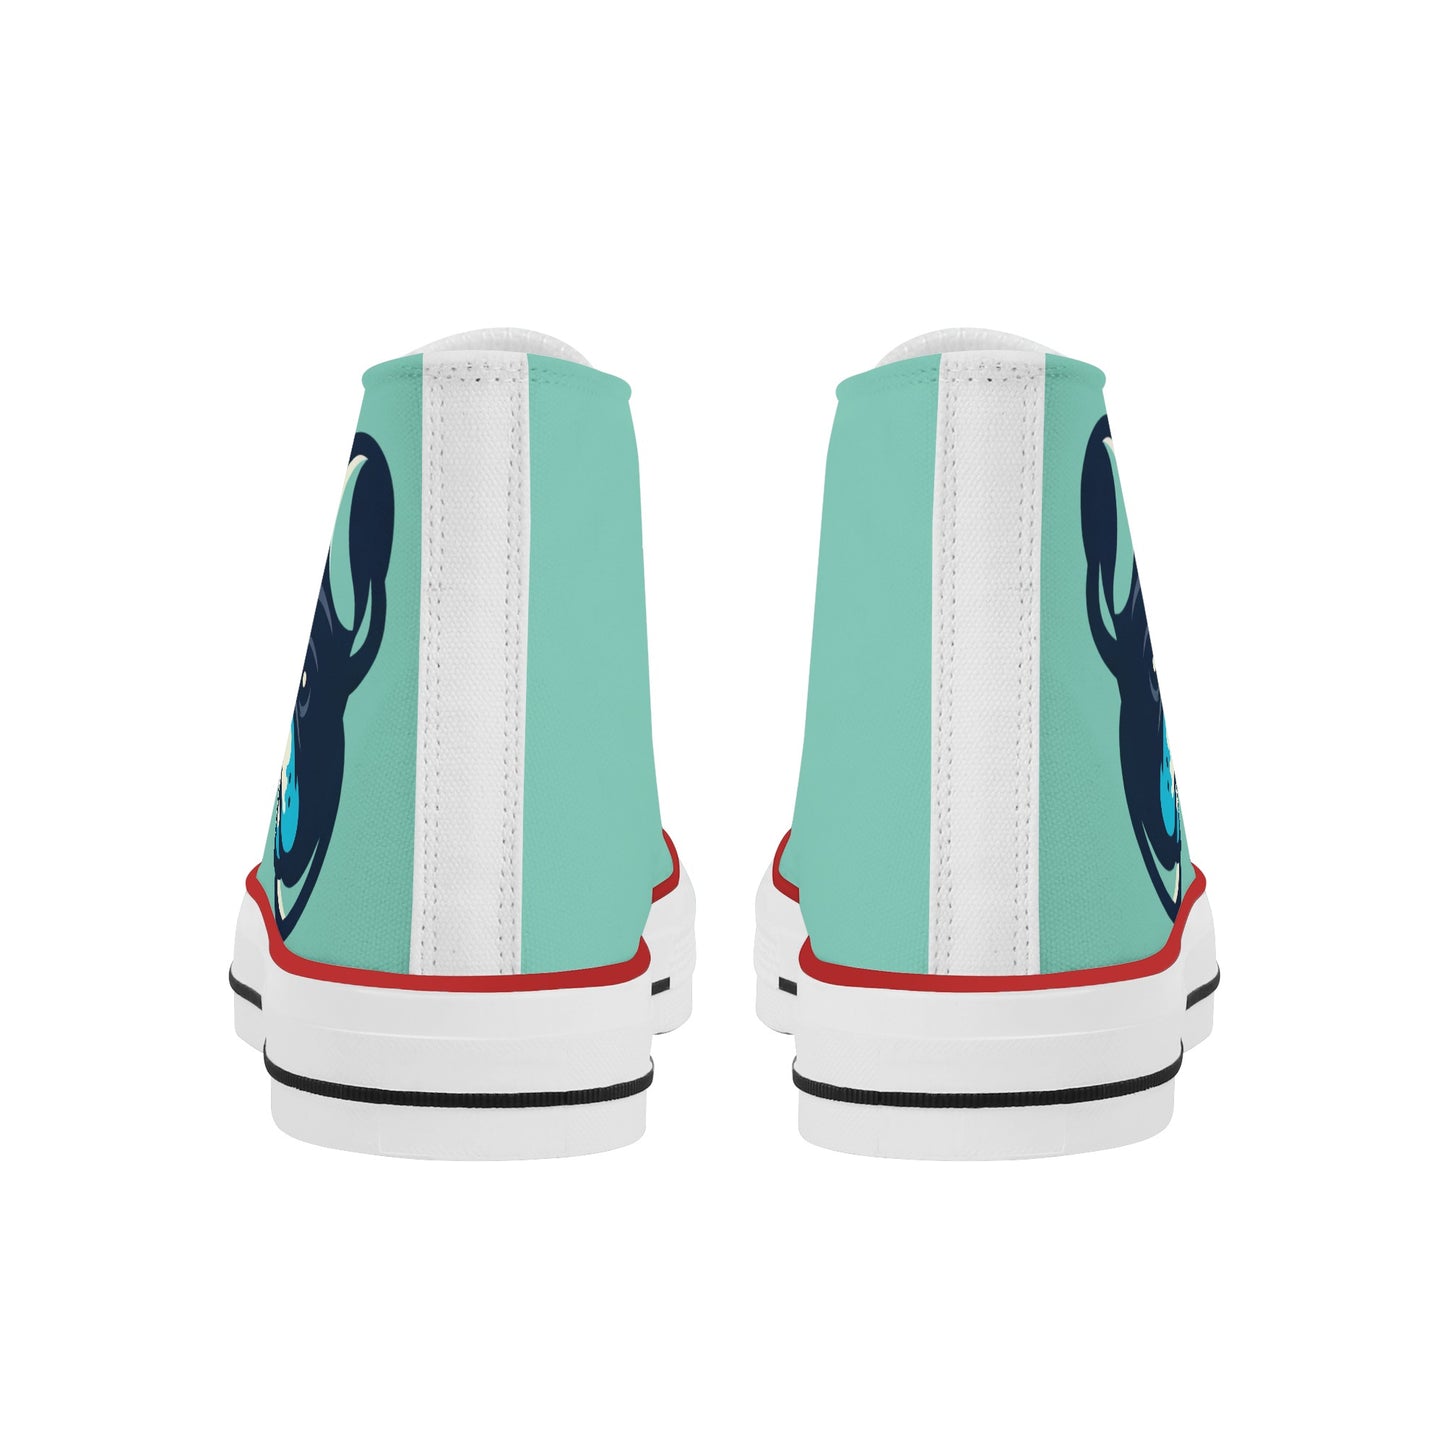 Lucky - Classic High Top Canvas Shoes